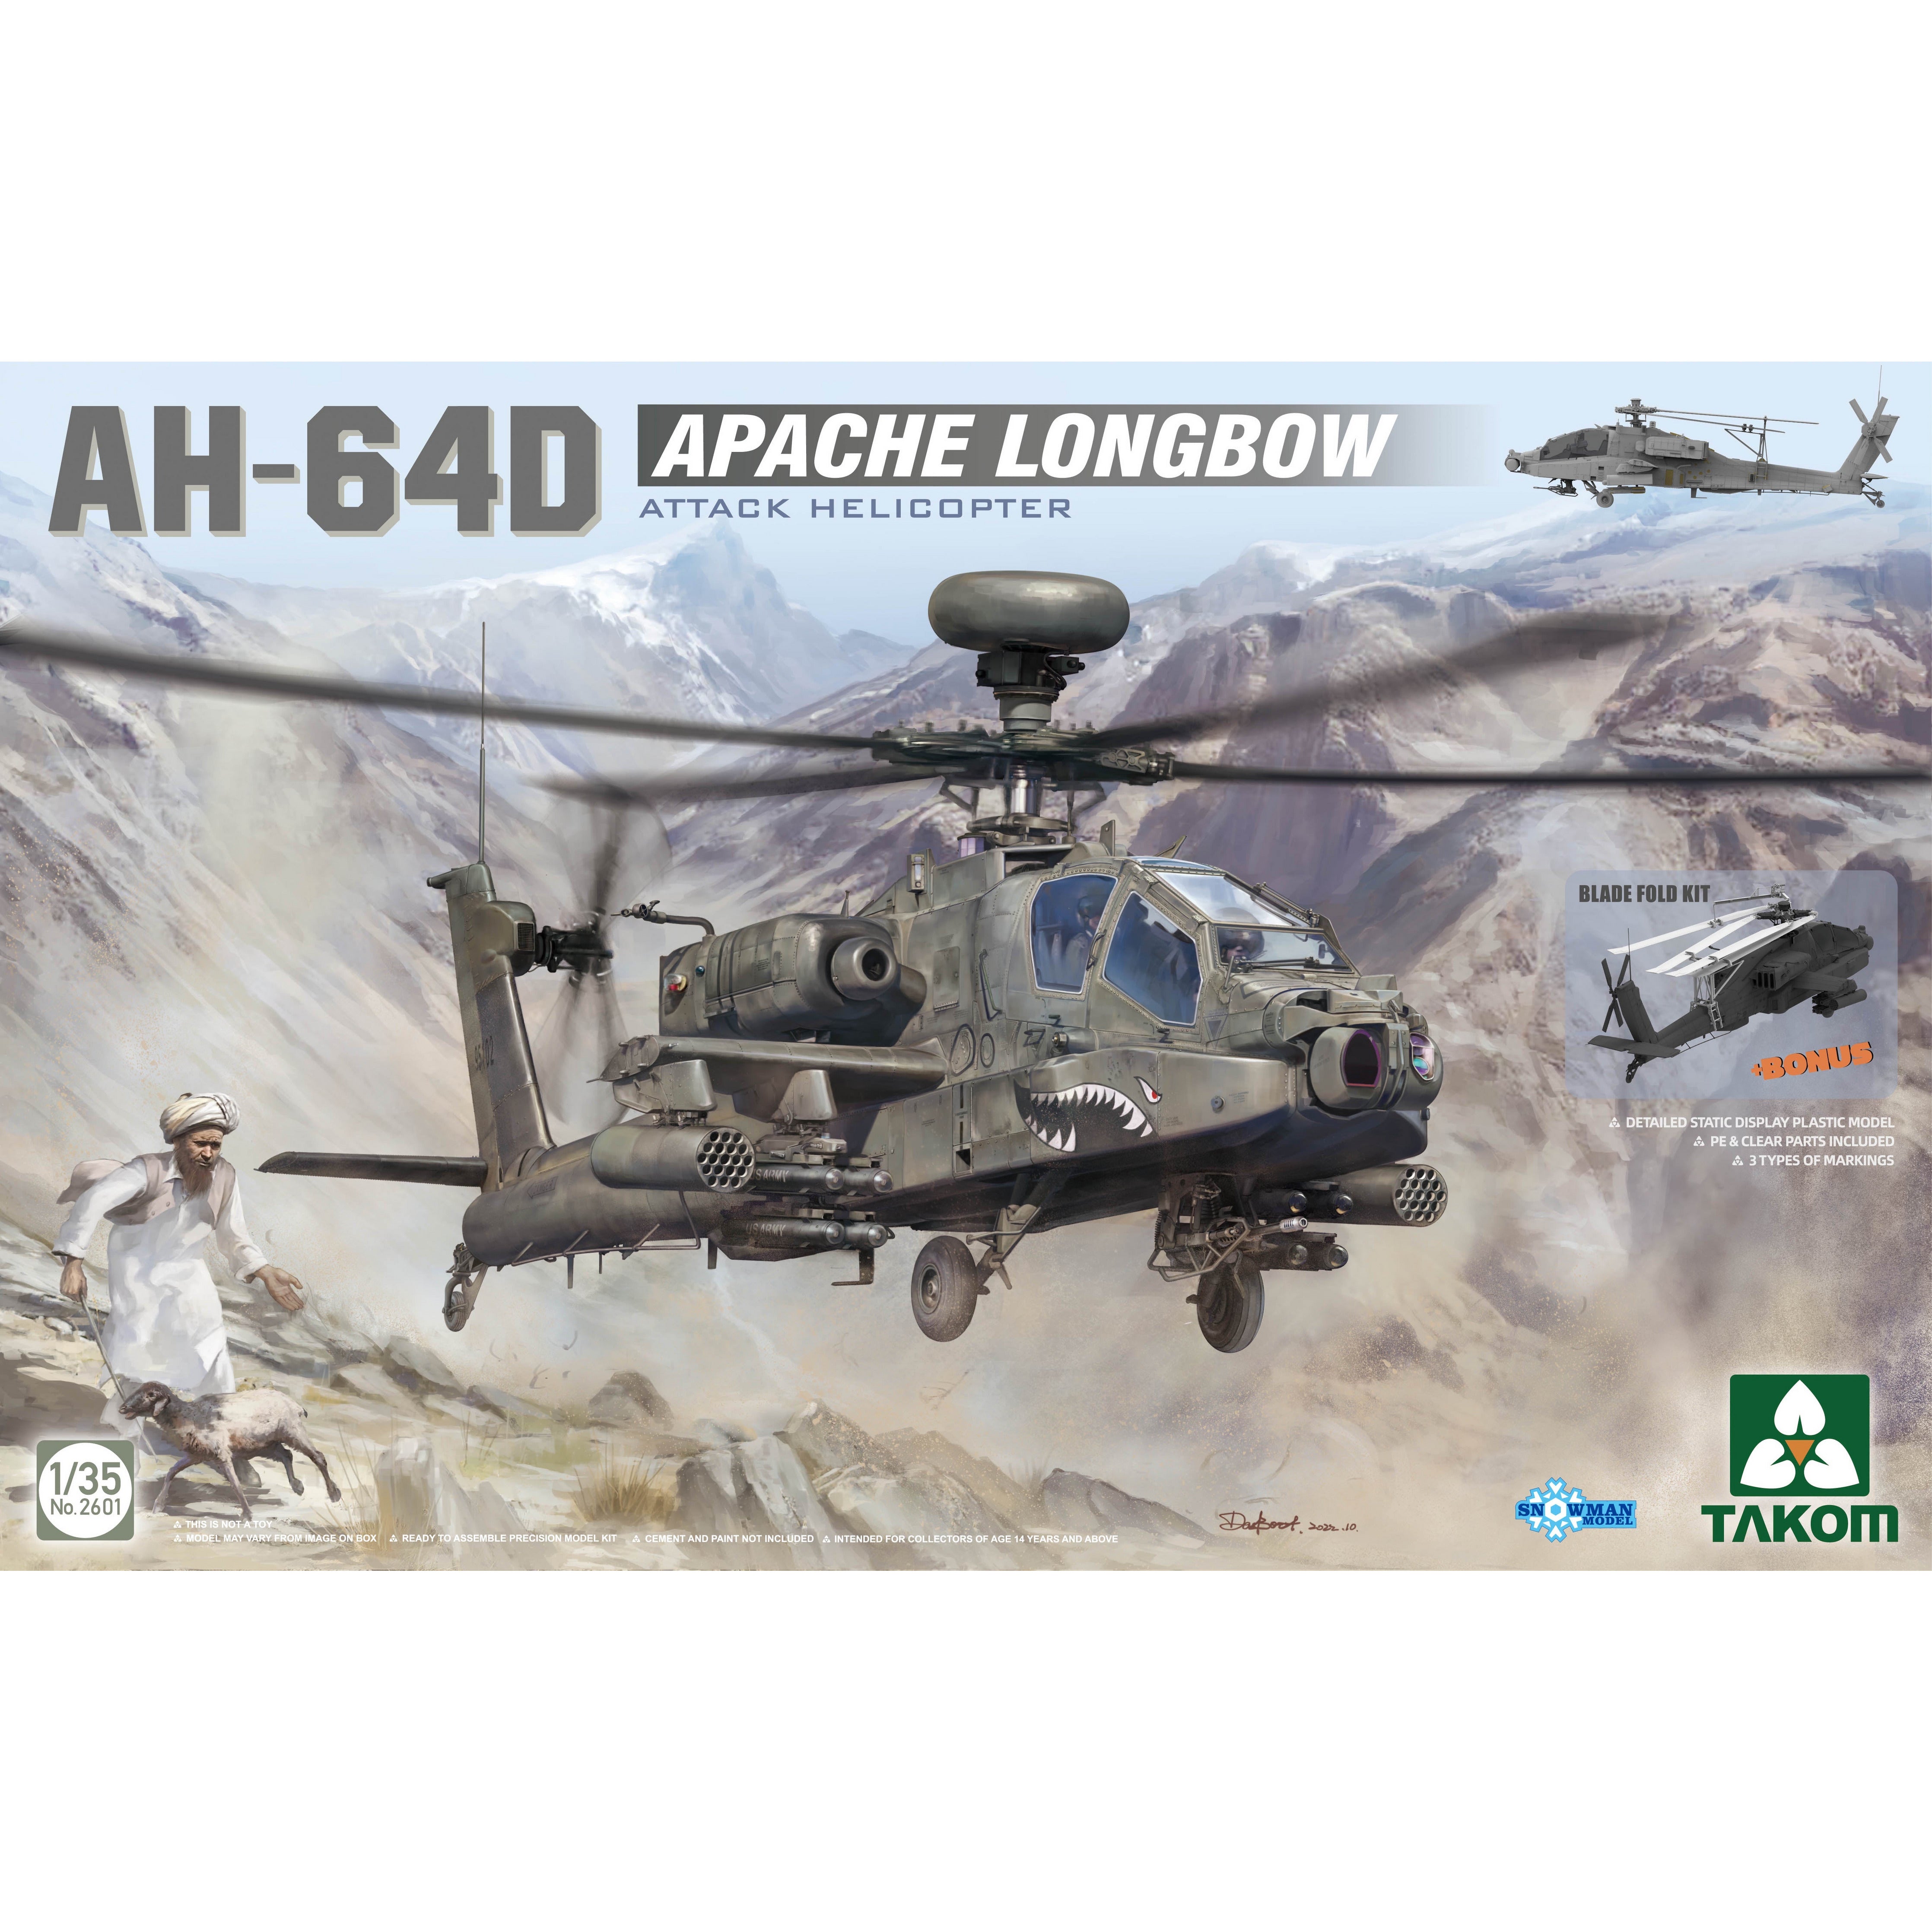 AH-64D Apache Longbow Attack Helicopter 1/35 #2601 by Takom